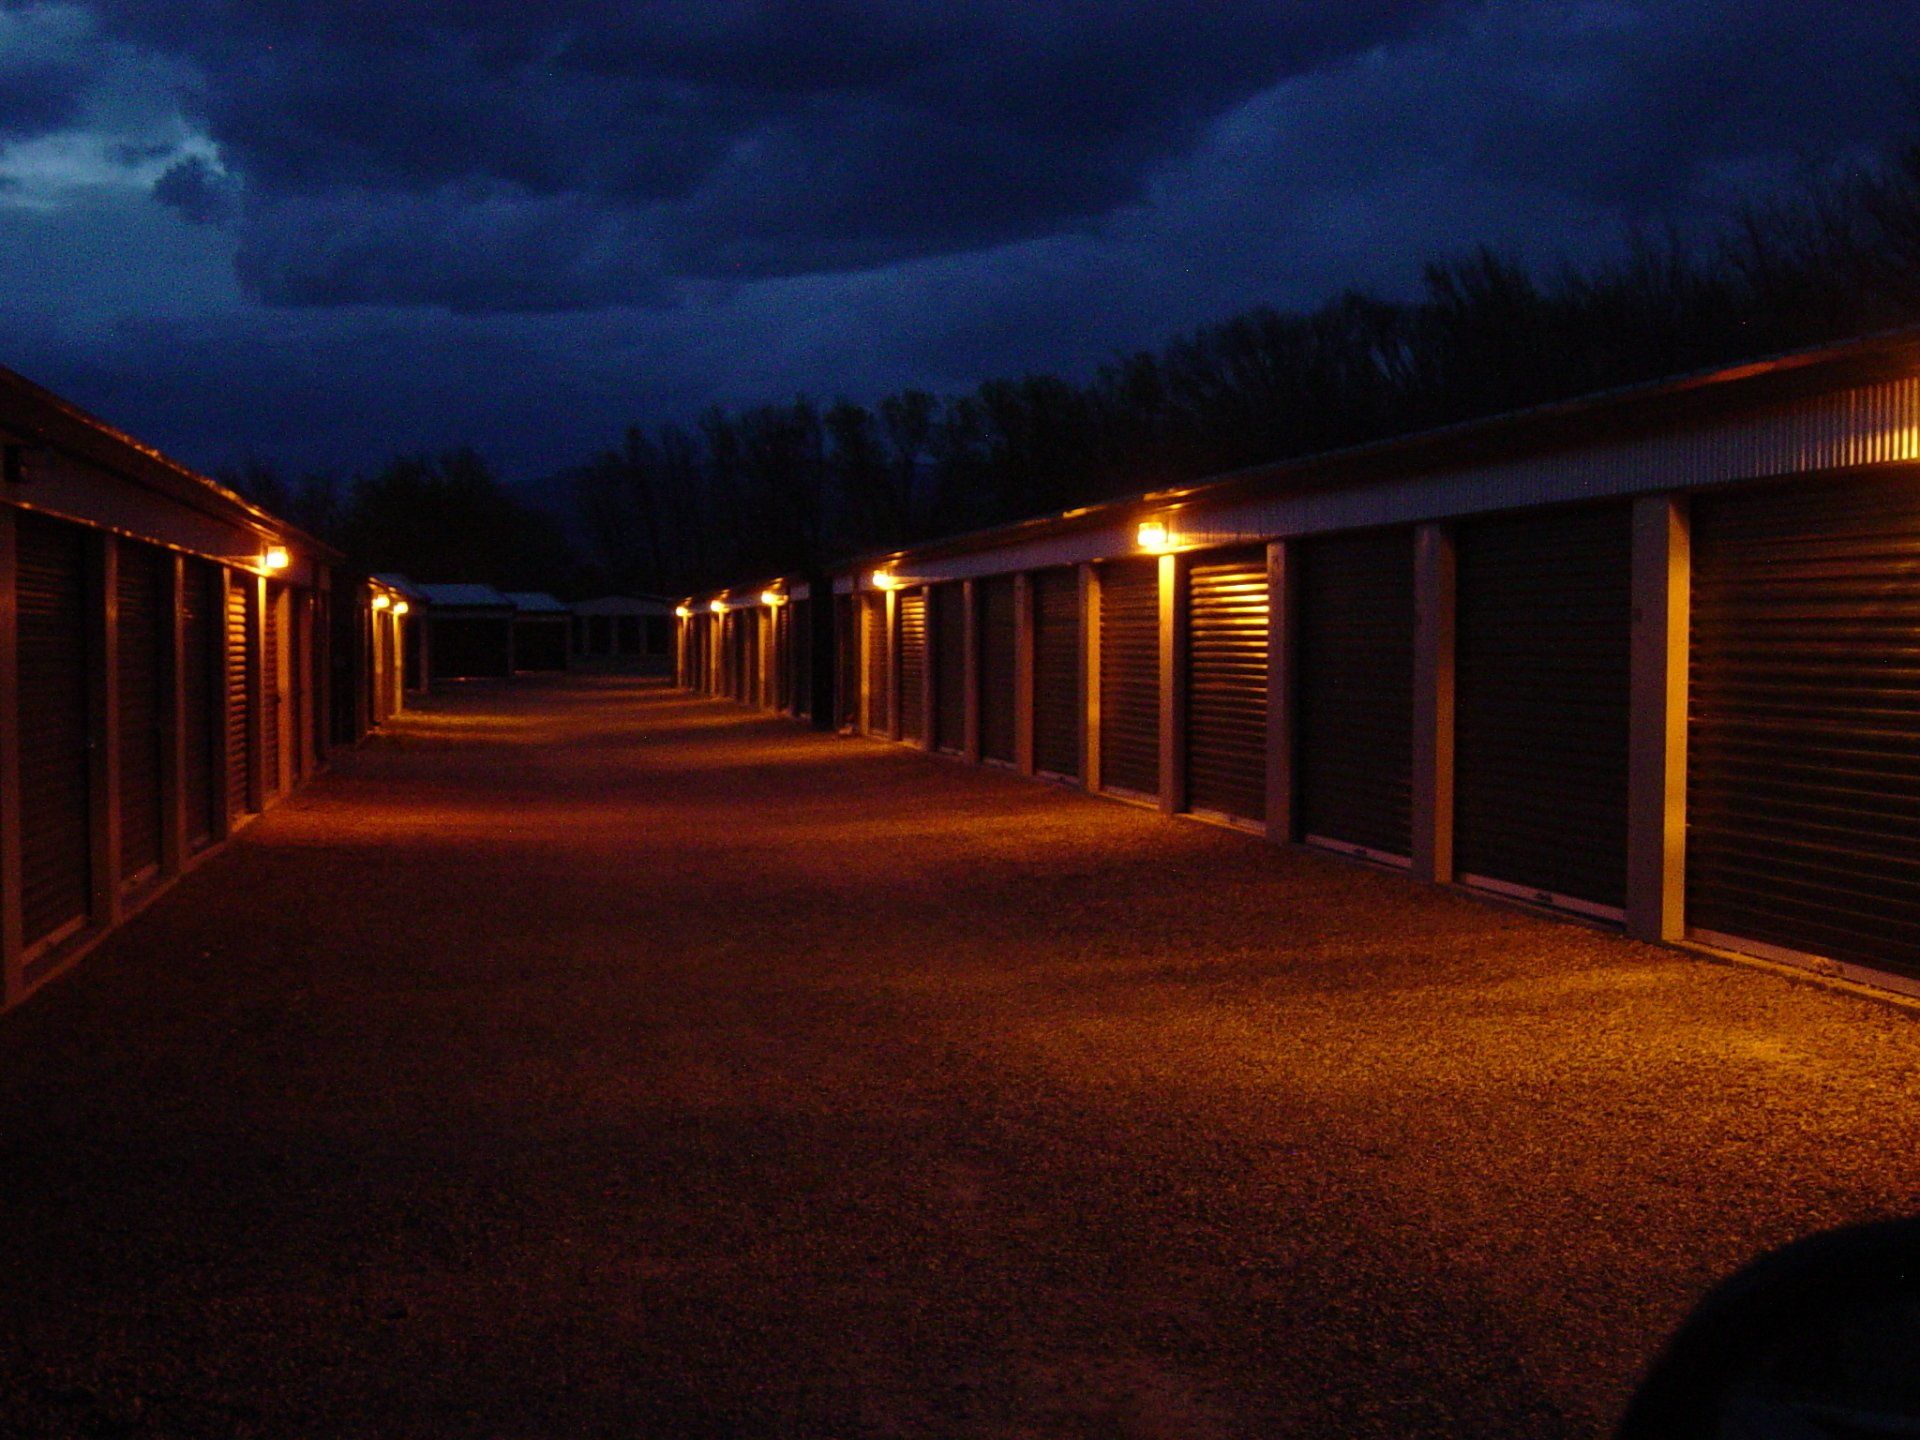 Internal Facility at Dark - Affordable Storage in Delta, CO